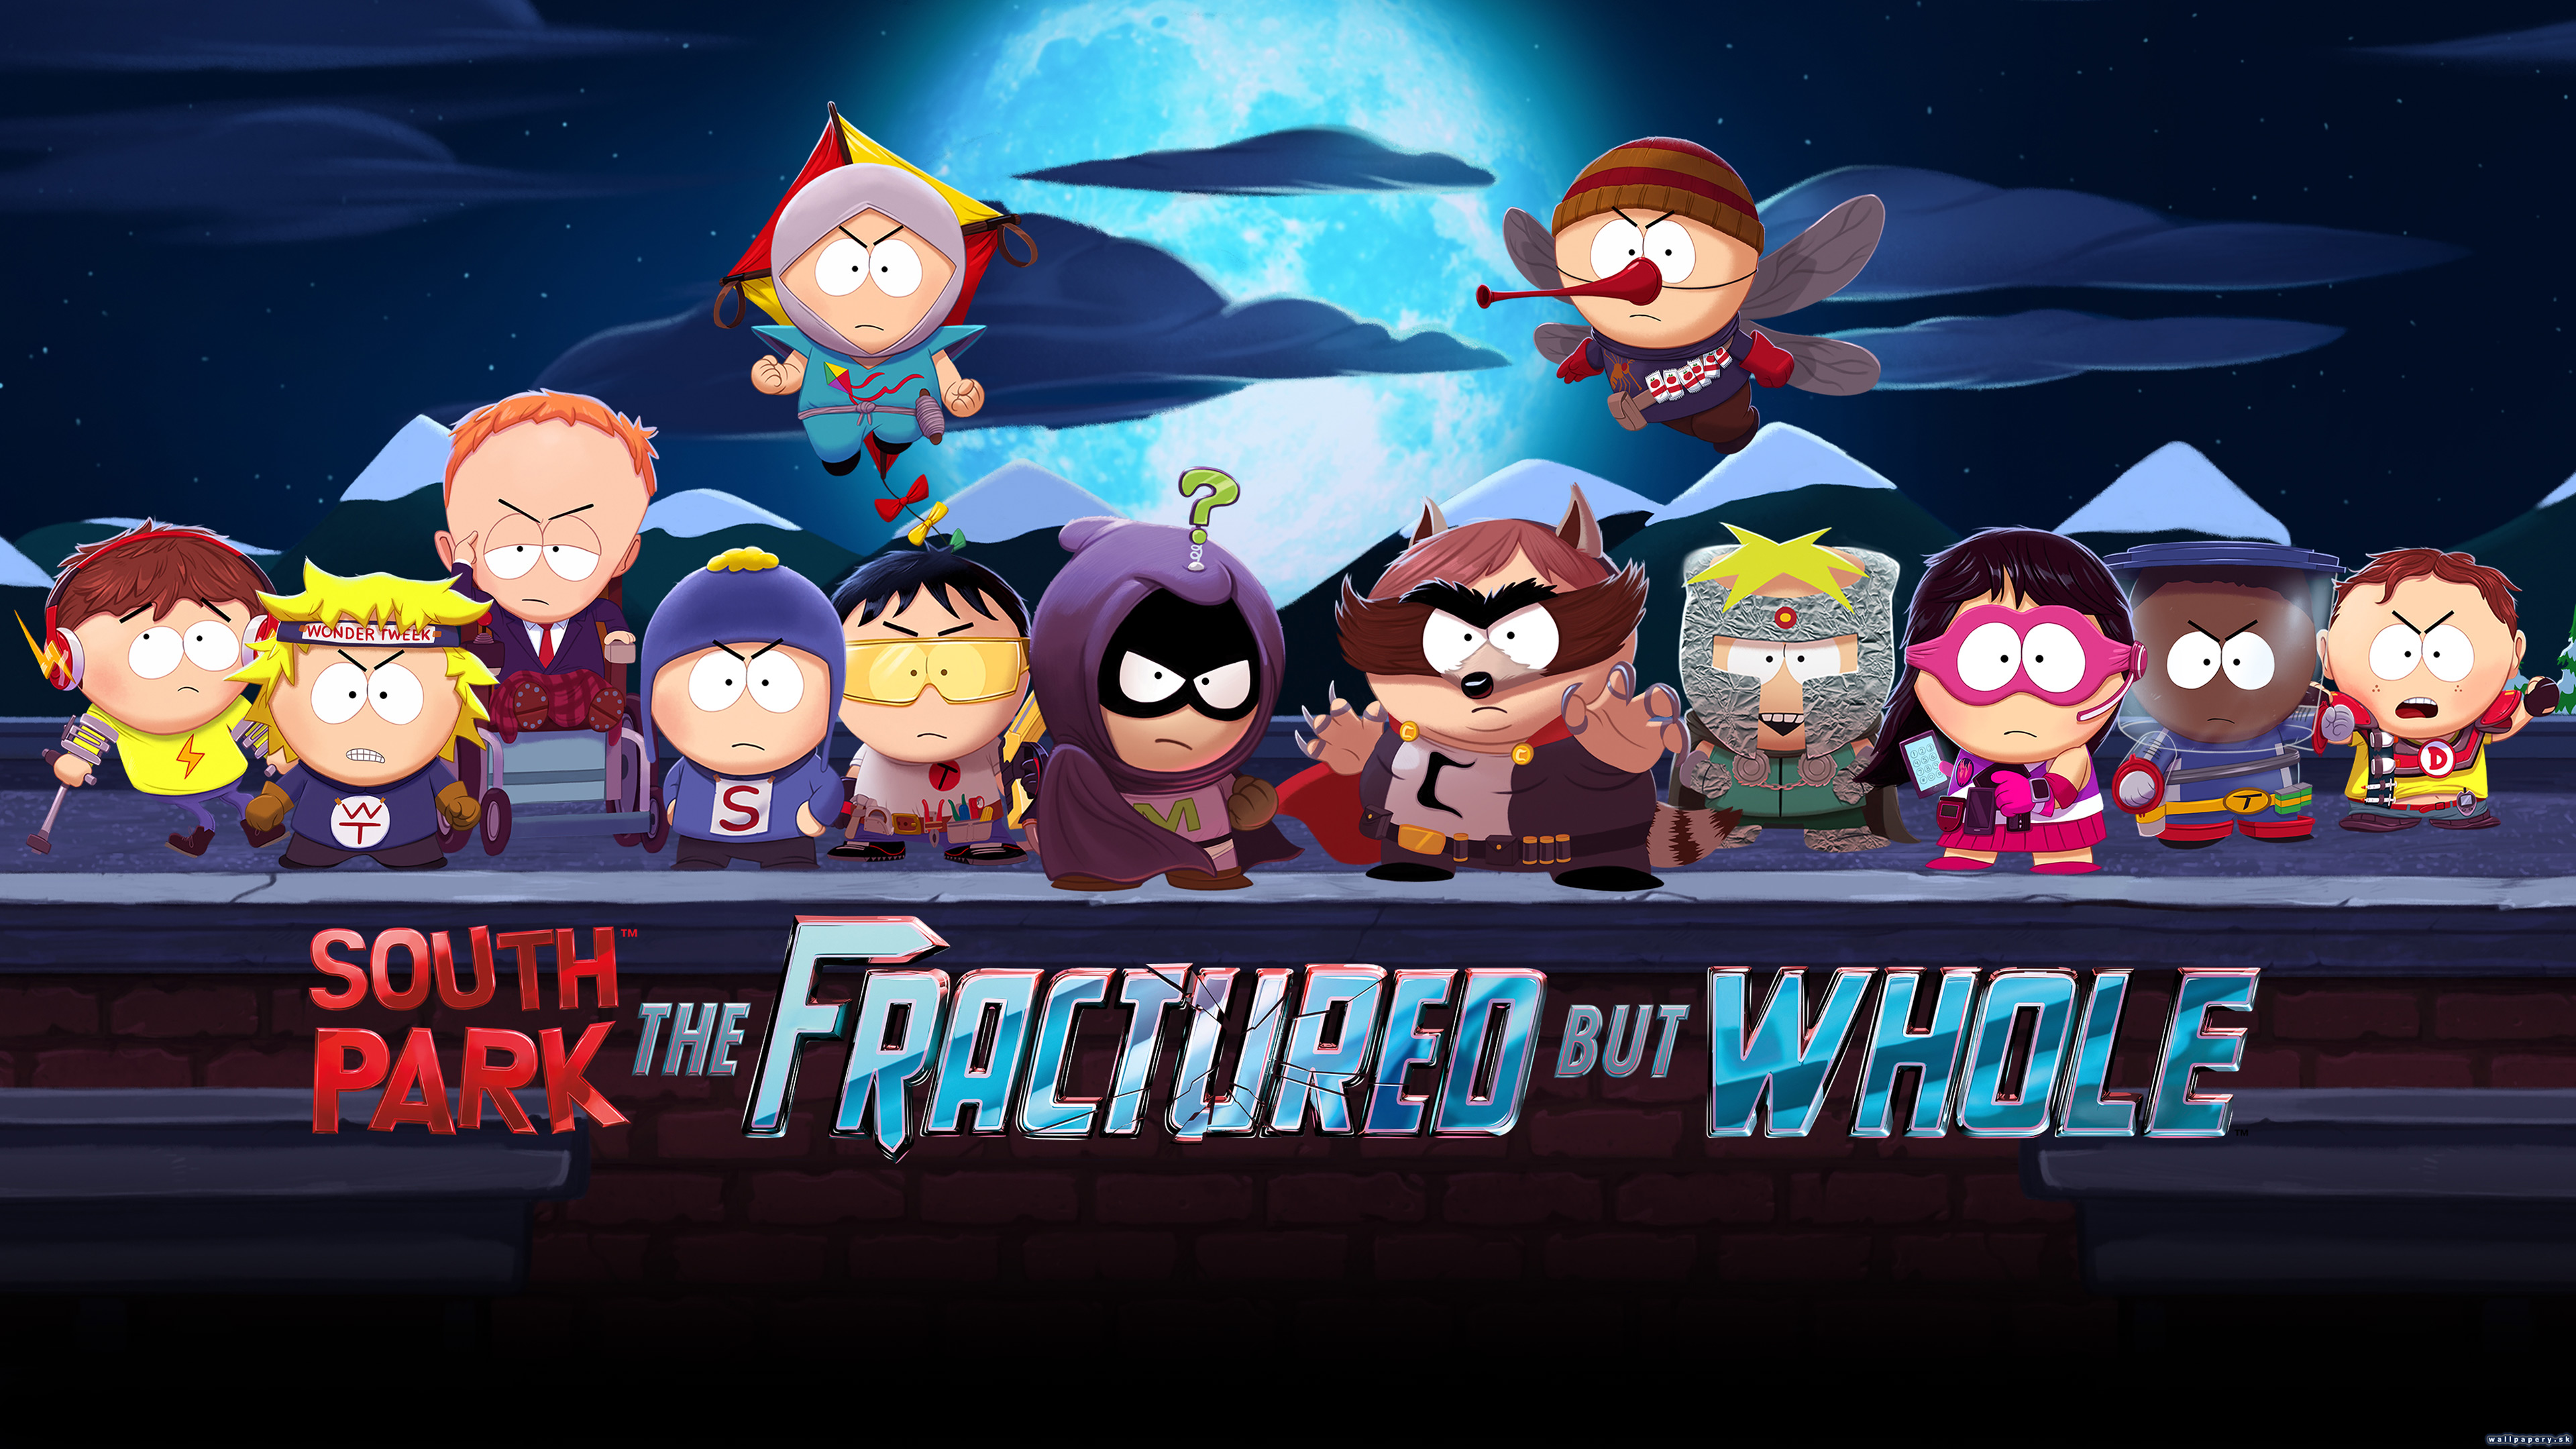 South Park: The Fractured but Whole - wallpaper 1